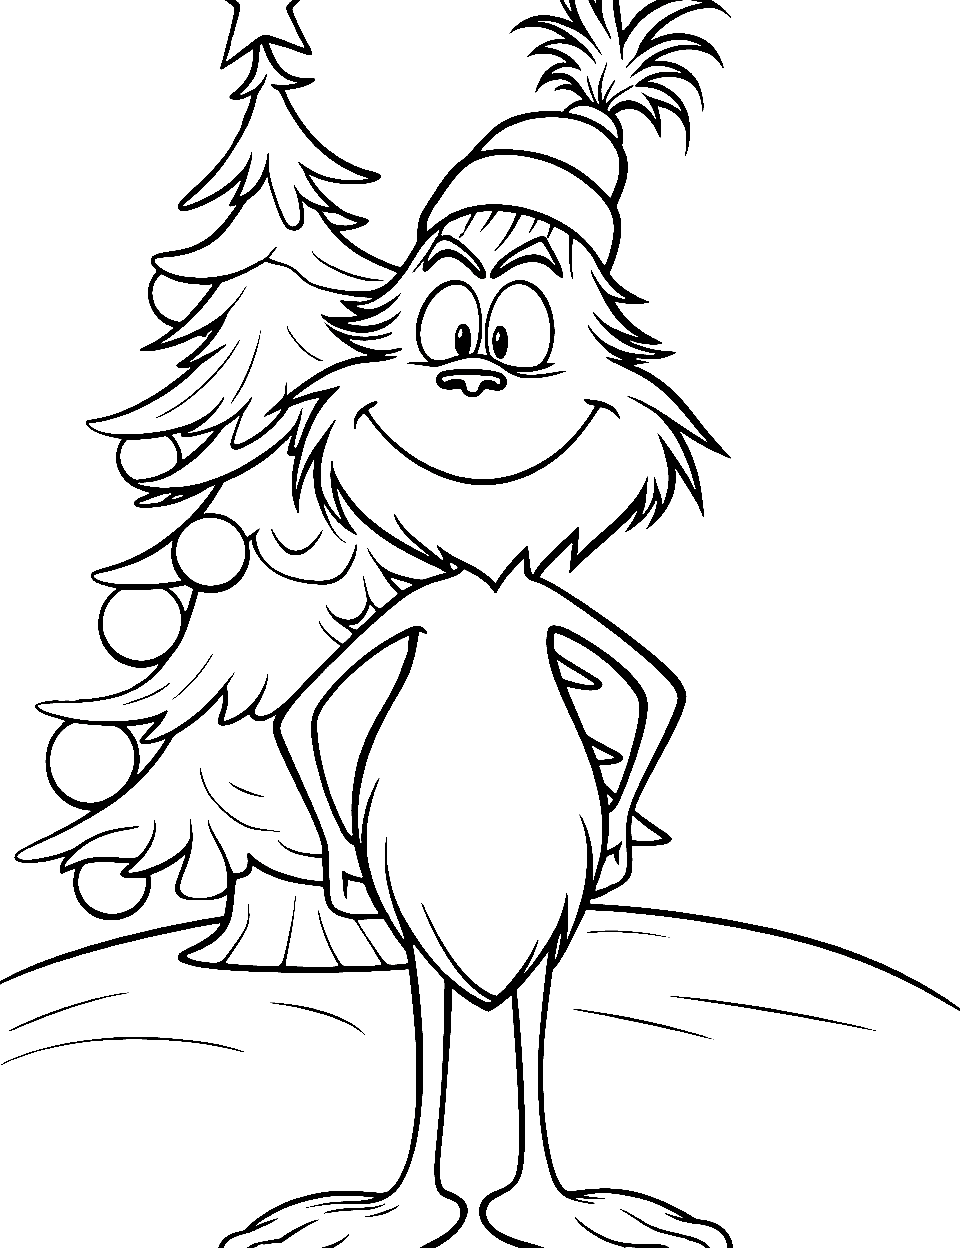 Christmas Tree Grinch Coloring Page - The Grinch is standing near a Christmas tree.